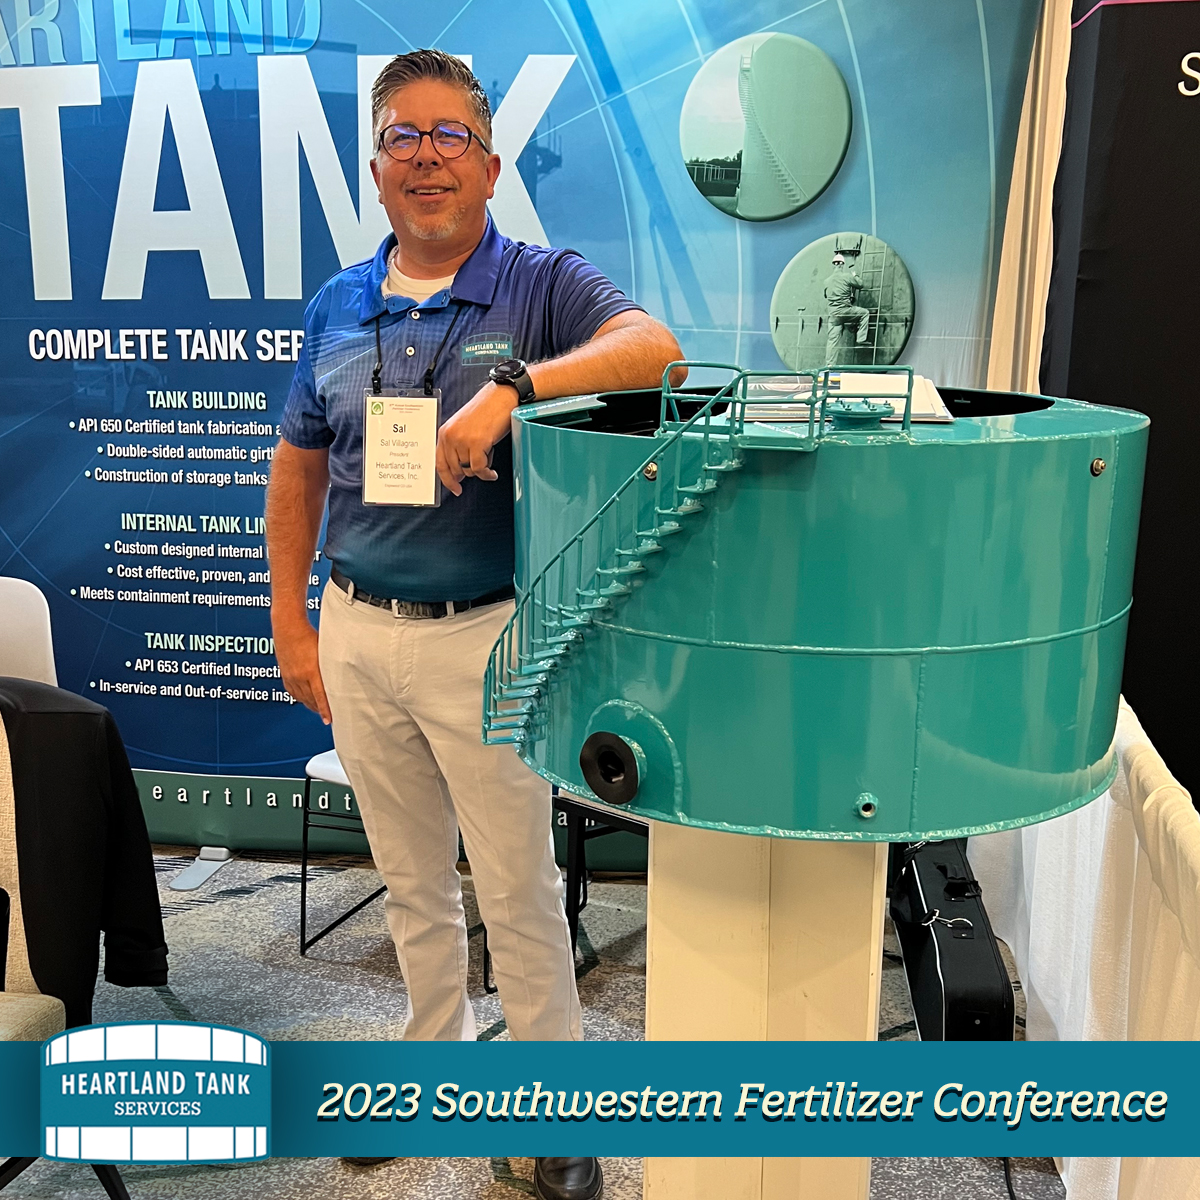 Heartland Tank Services Sal Villagran at the booth at the Southwestern Fertilizer Conference